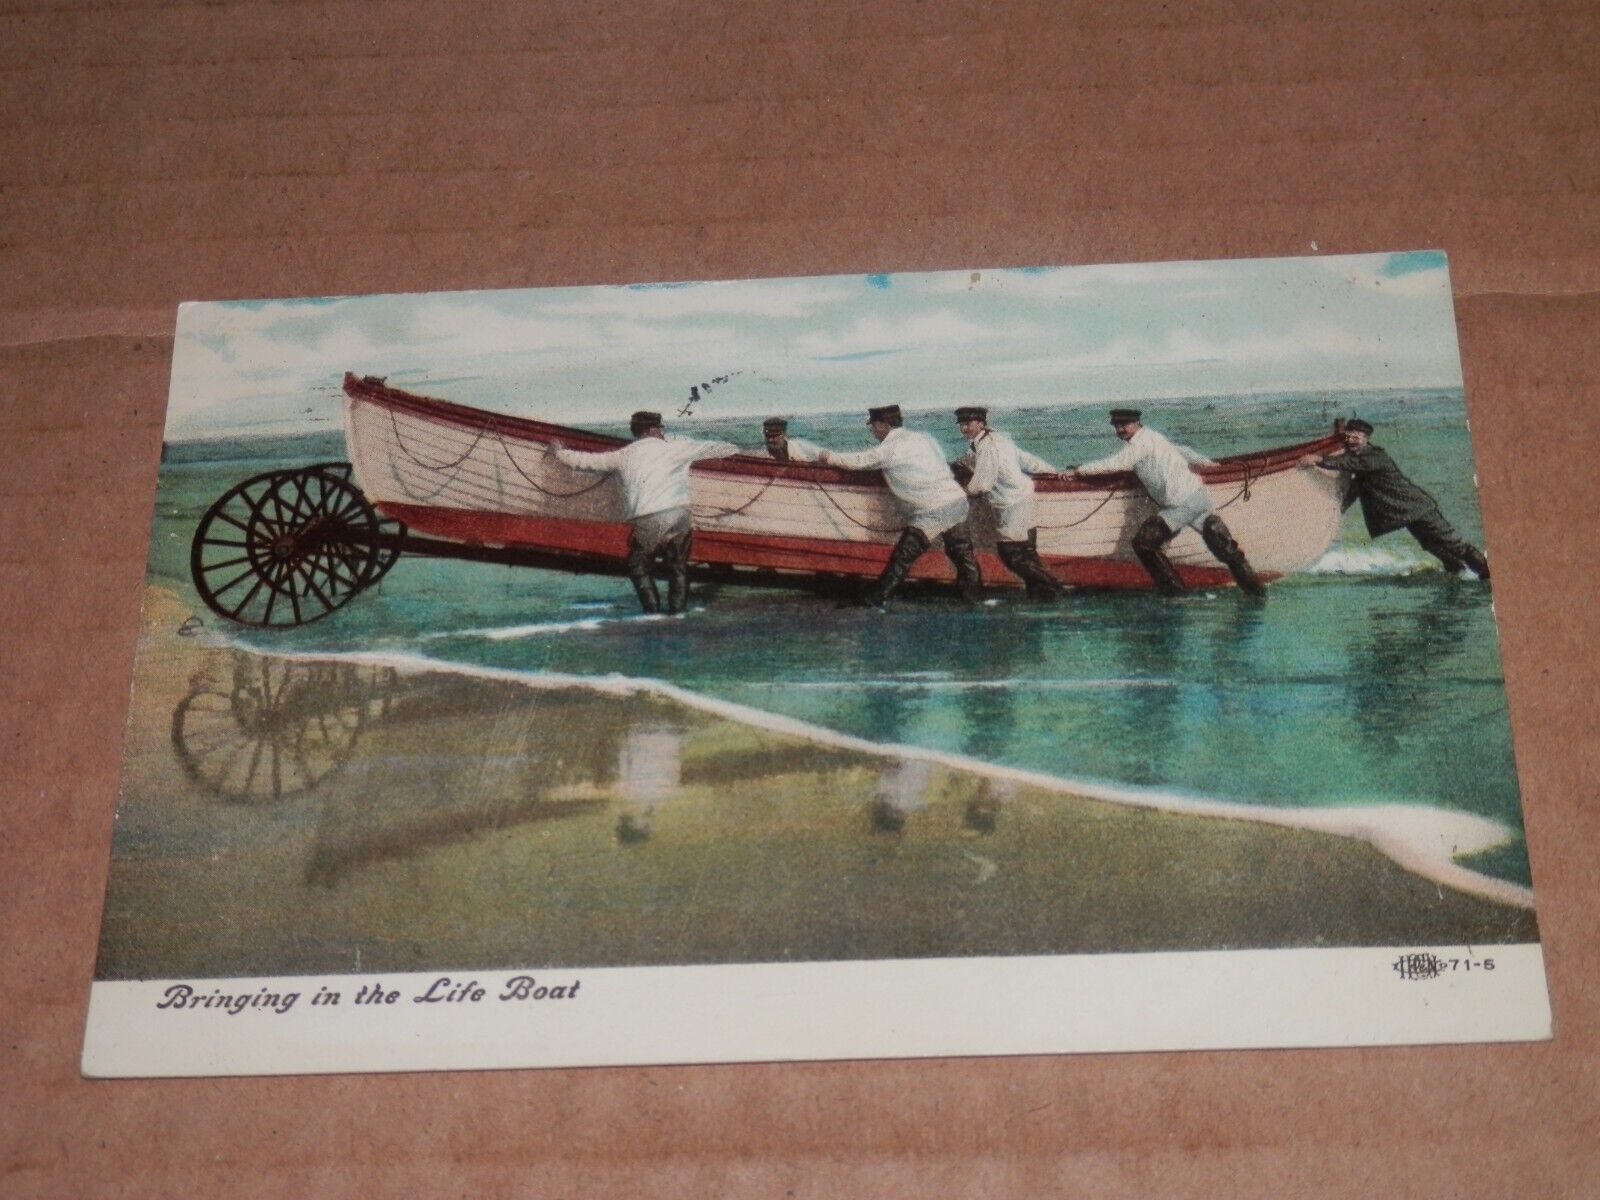 COATESVILLE PA - 1909 USED POSTCARD - BRINGING IN THE LIFE BOAT - To Lancaster